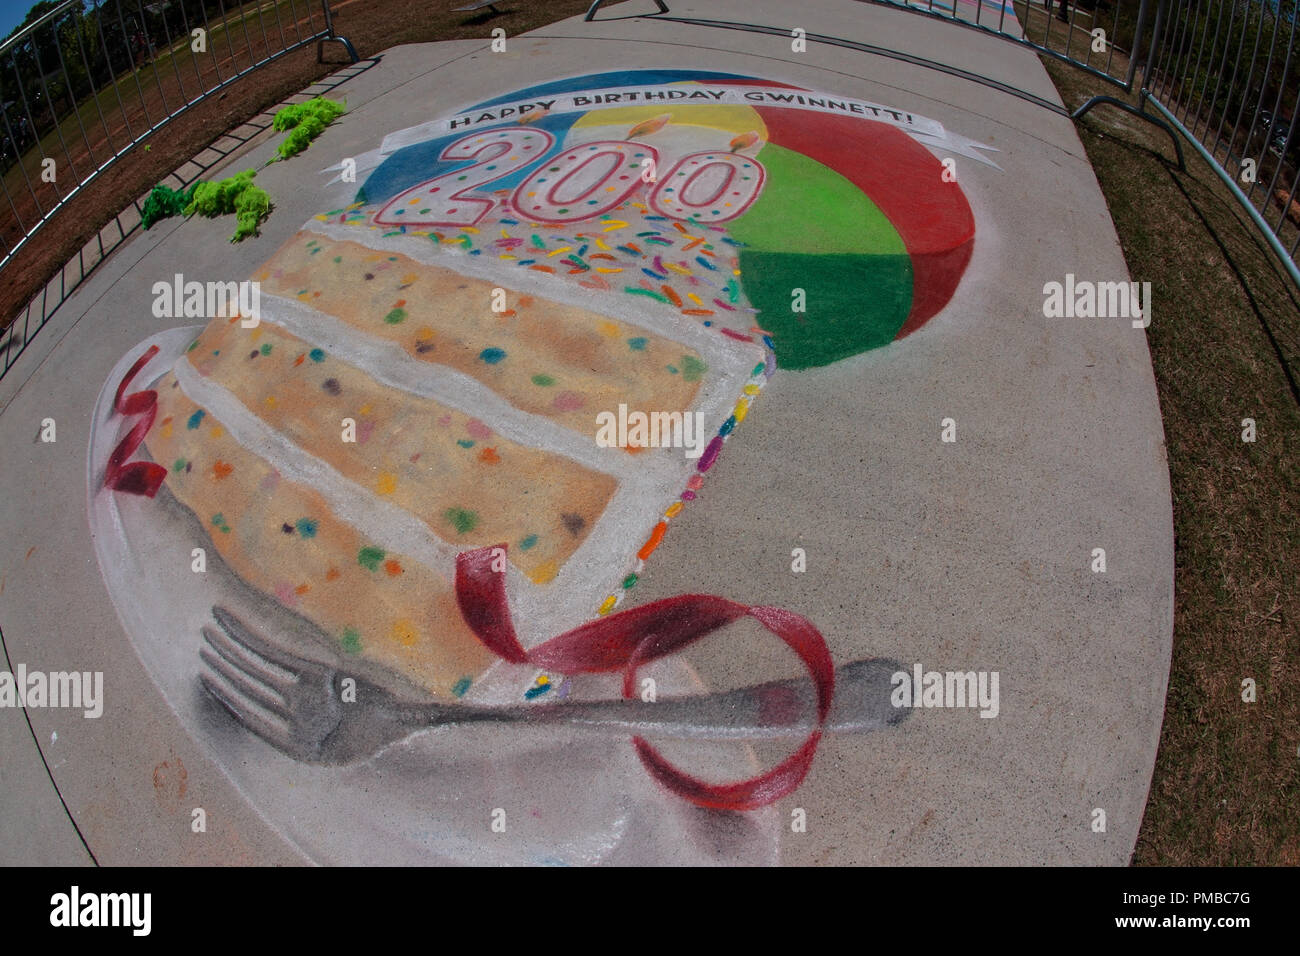 Chalk art covers part of a sidewalk at a public park at the Lawrenceville Arts Fest on April 28, 2018 in Lawrenceville, GA. Stock Photo